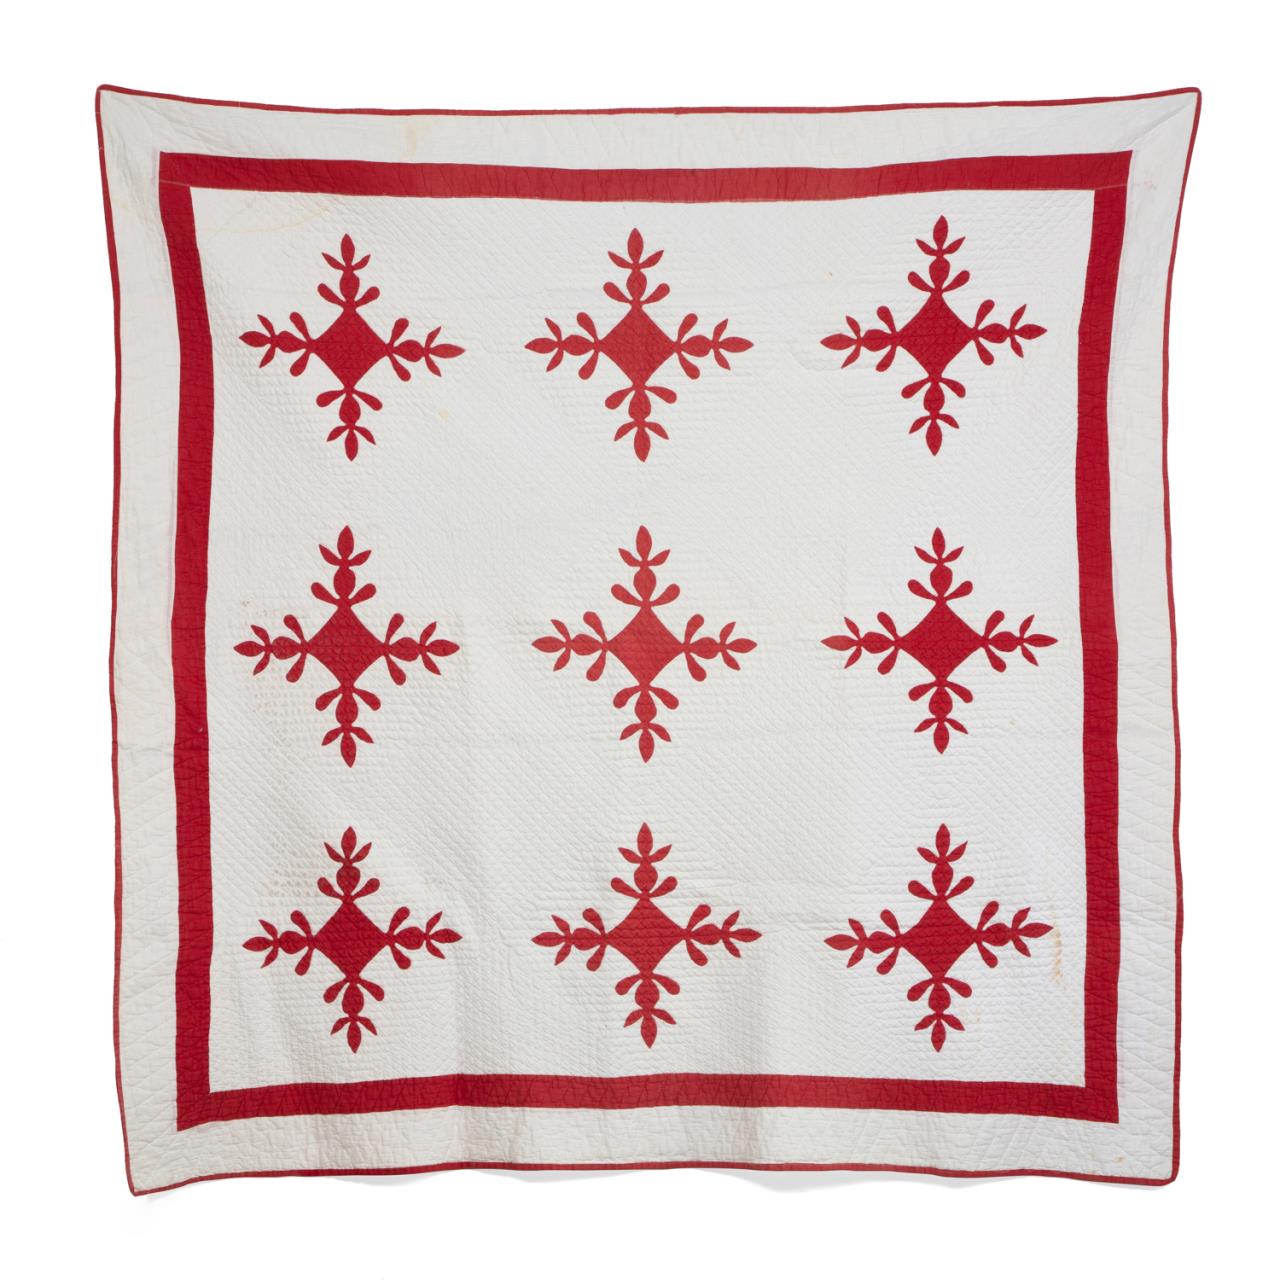 HAND QUILTED RED AND WHITE APPLIQUE 2889b9